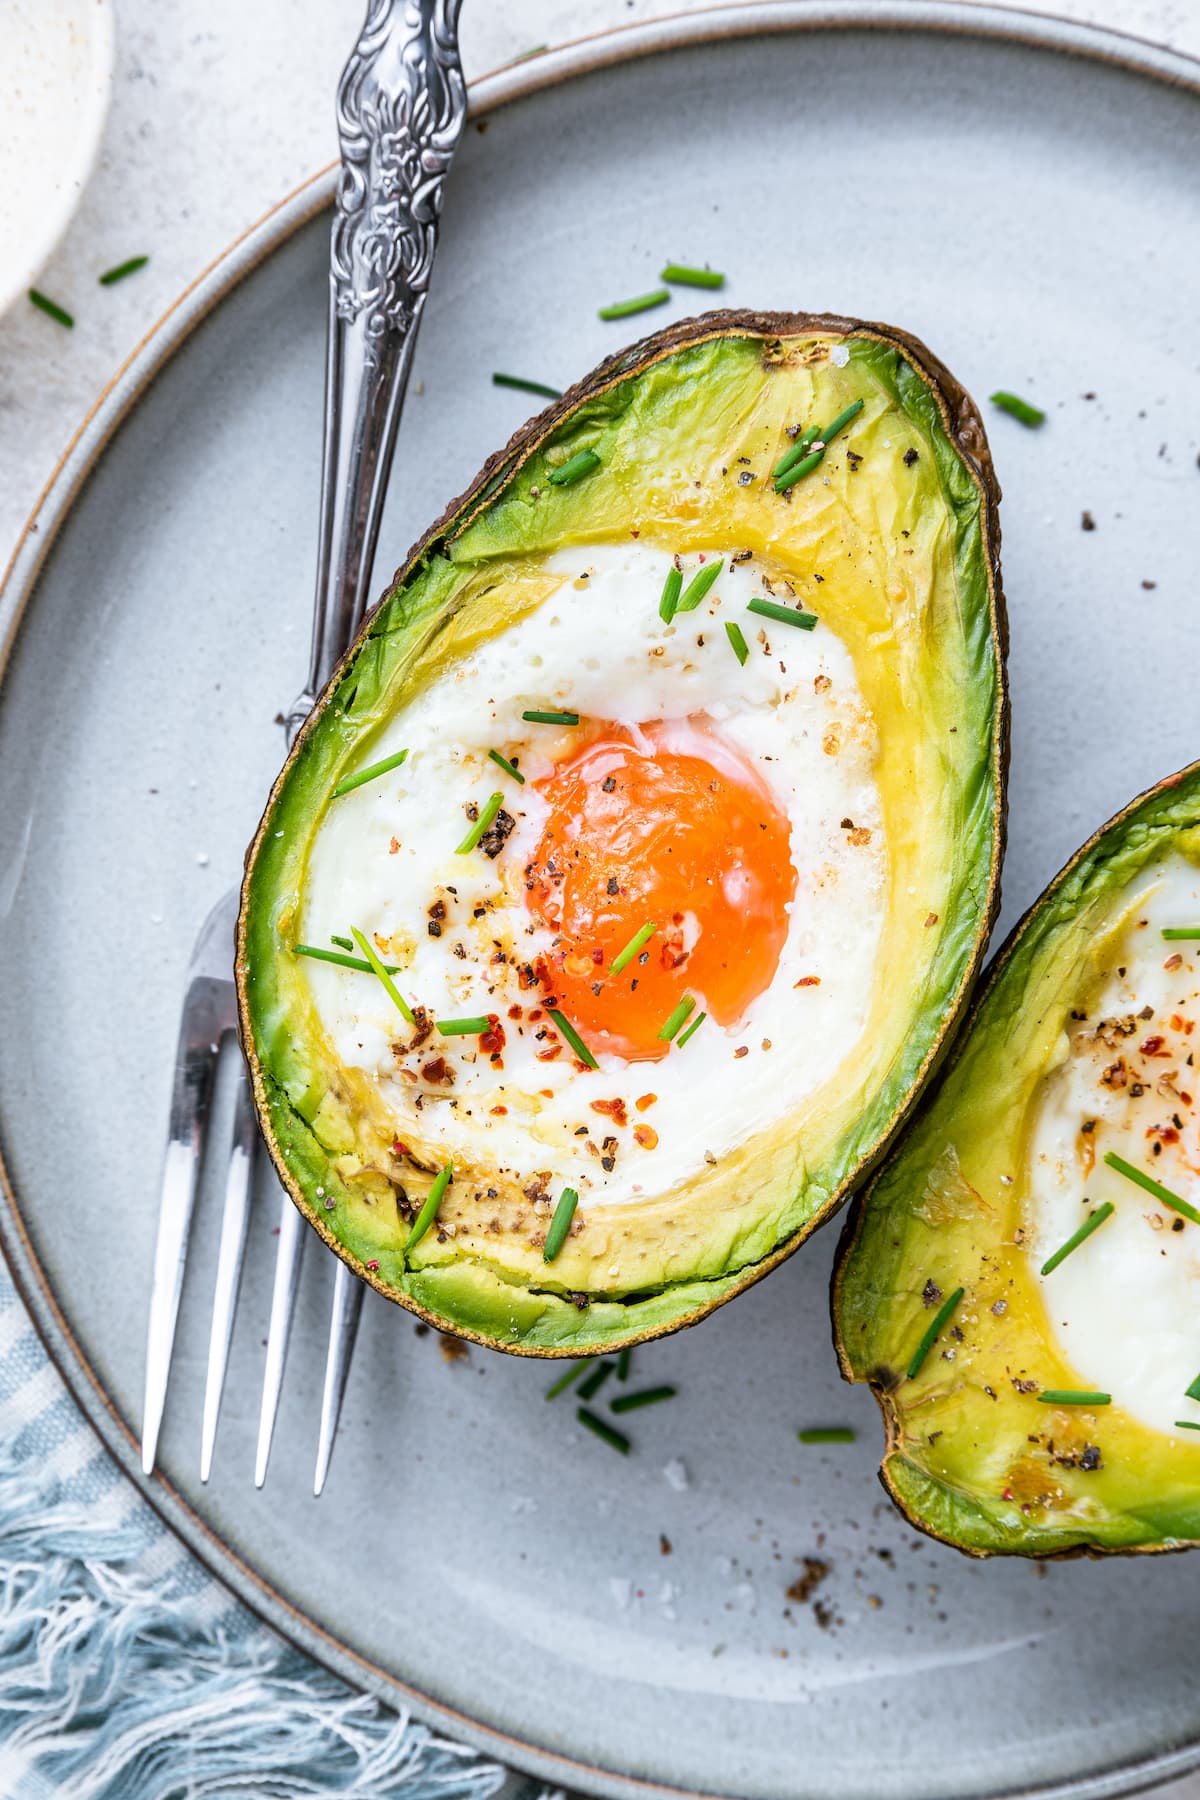 A baked avocado with an egg in the center on a plate with a fork.